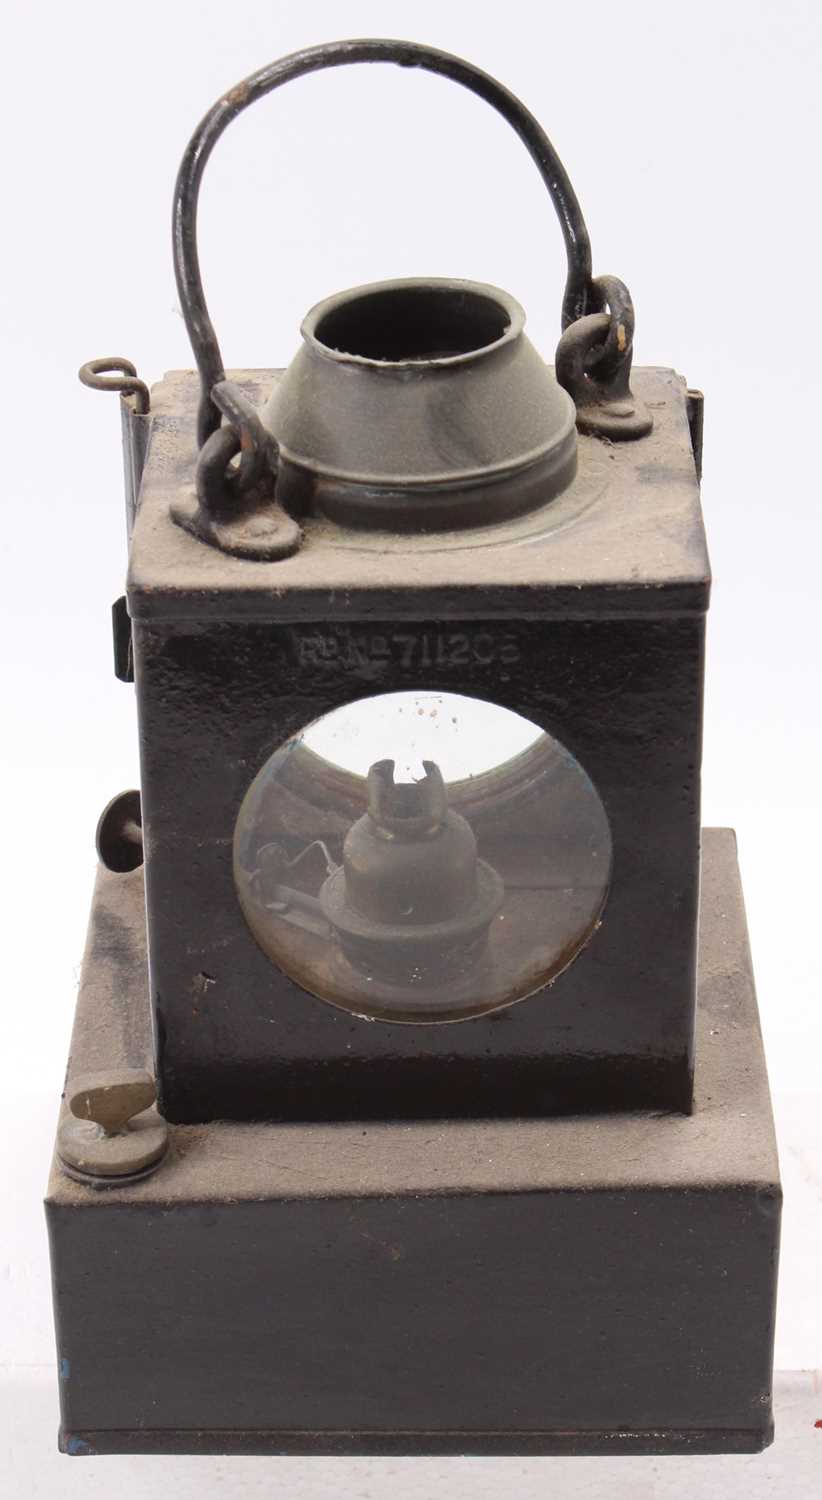 A Welch patent four aspect Eastern Region railway hand lamp with manufacturer's plaque and station - Image 2 of 2